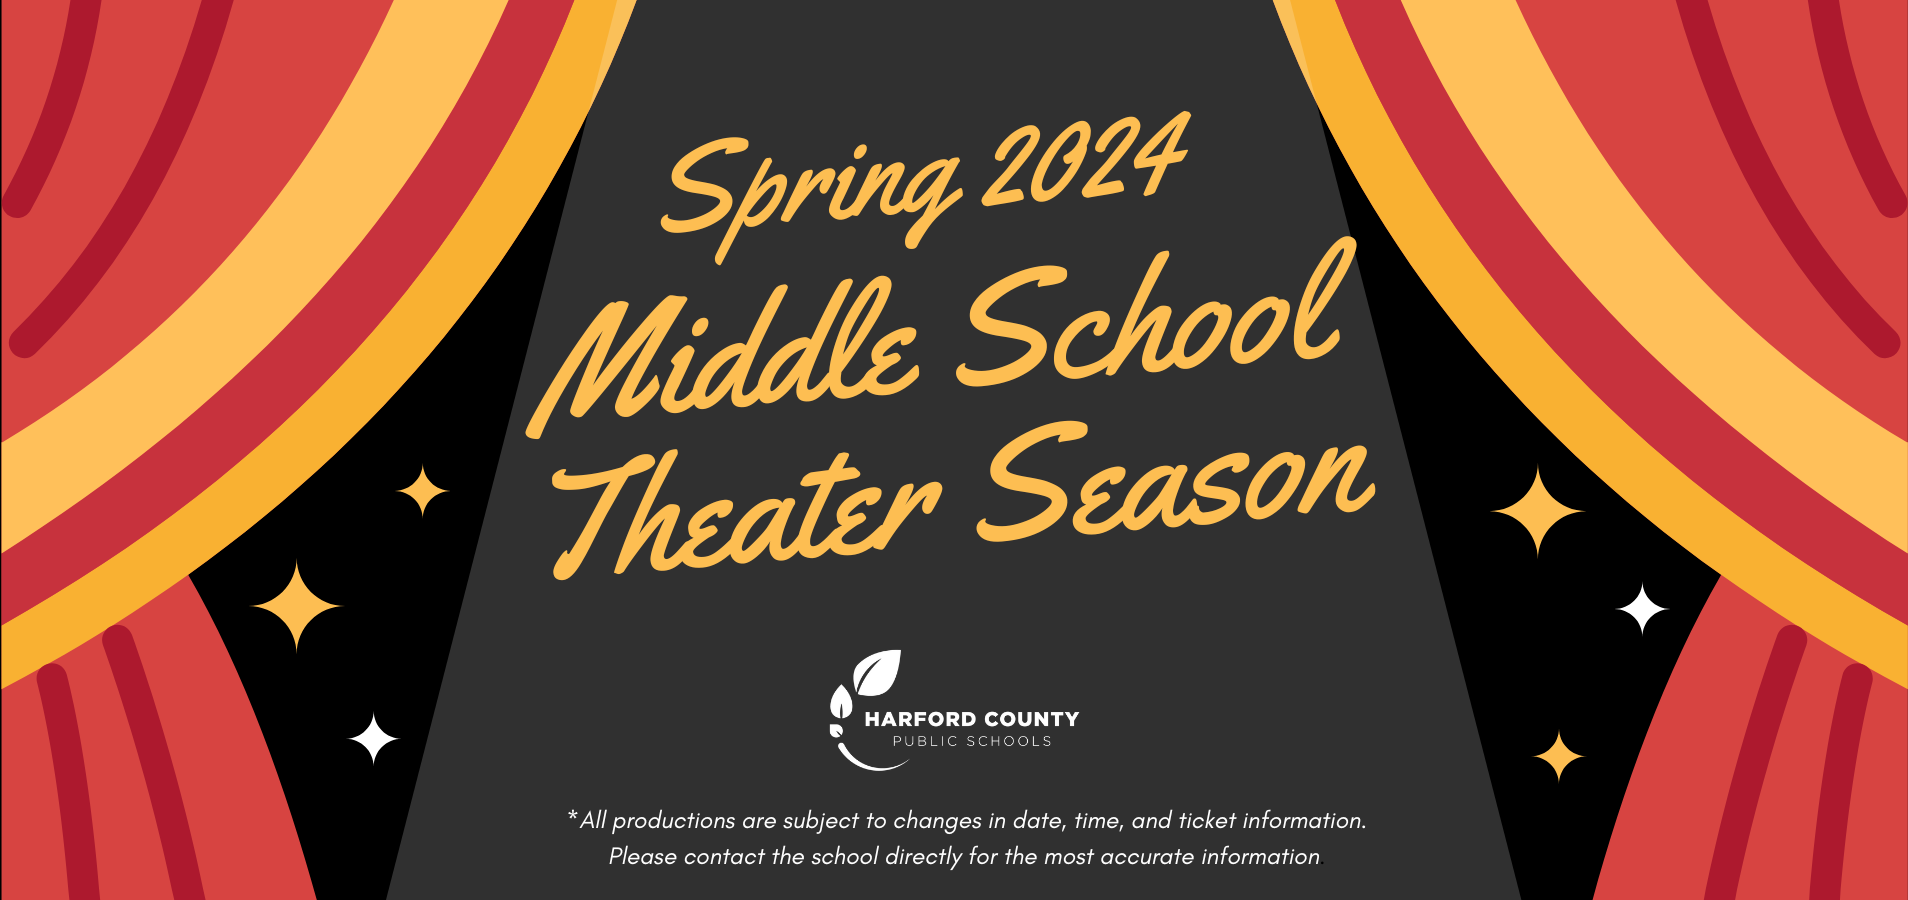 Middle School Spring 2024 Theater Schedule